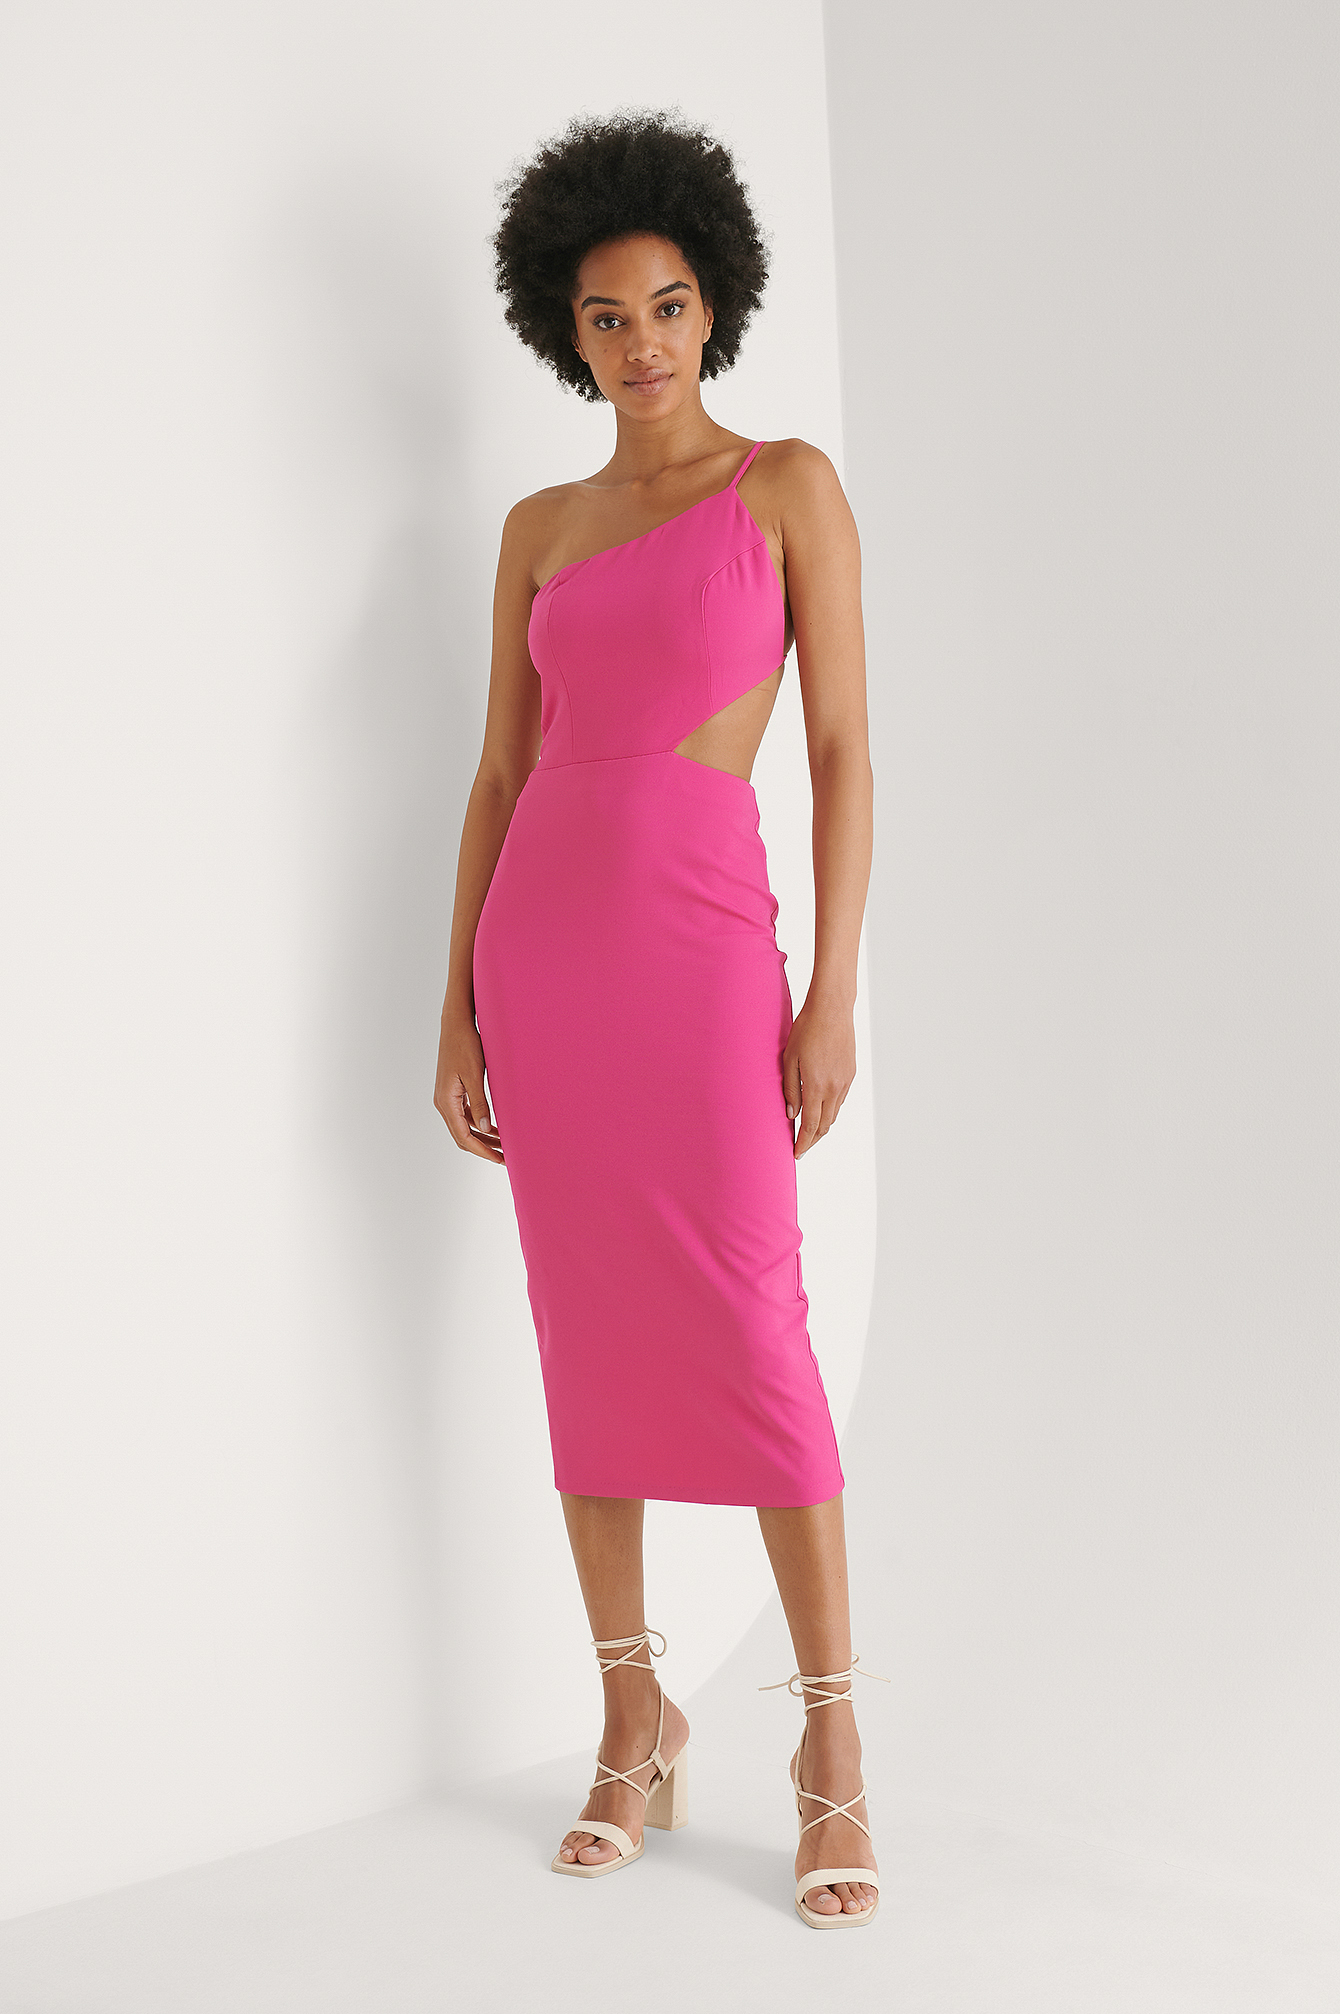 Cut Out Detail Midi Dress Outfit